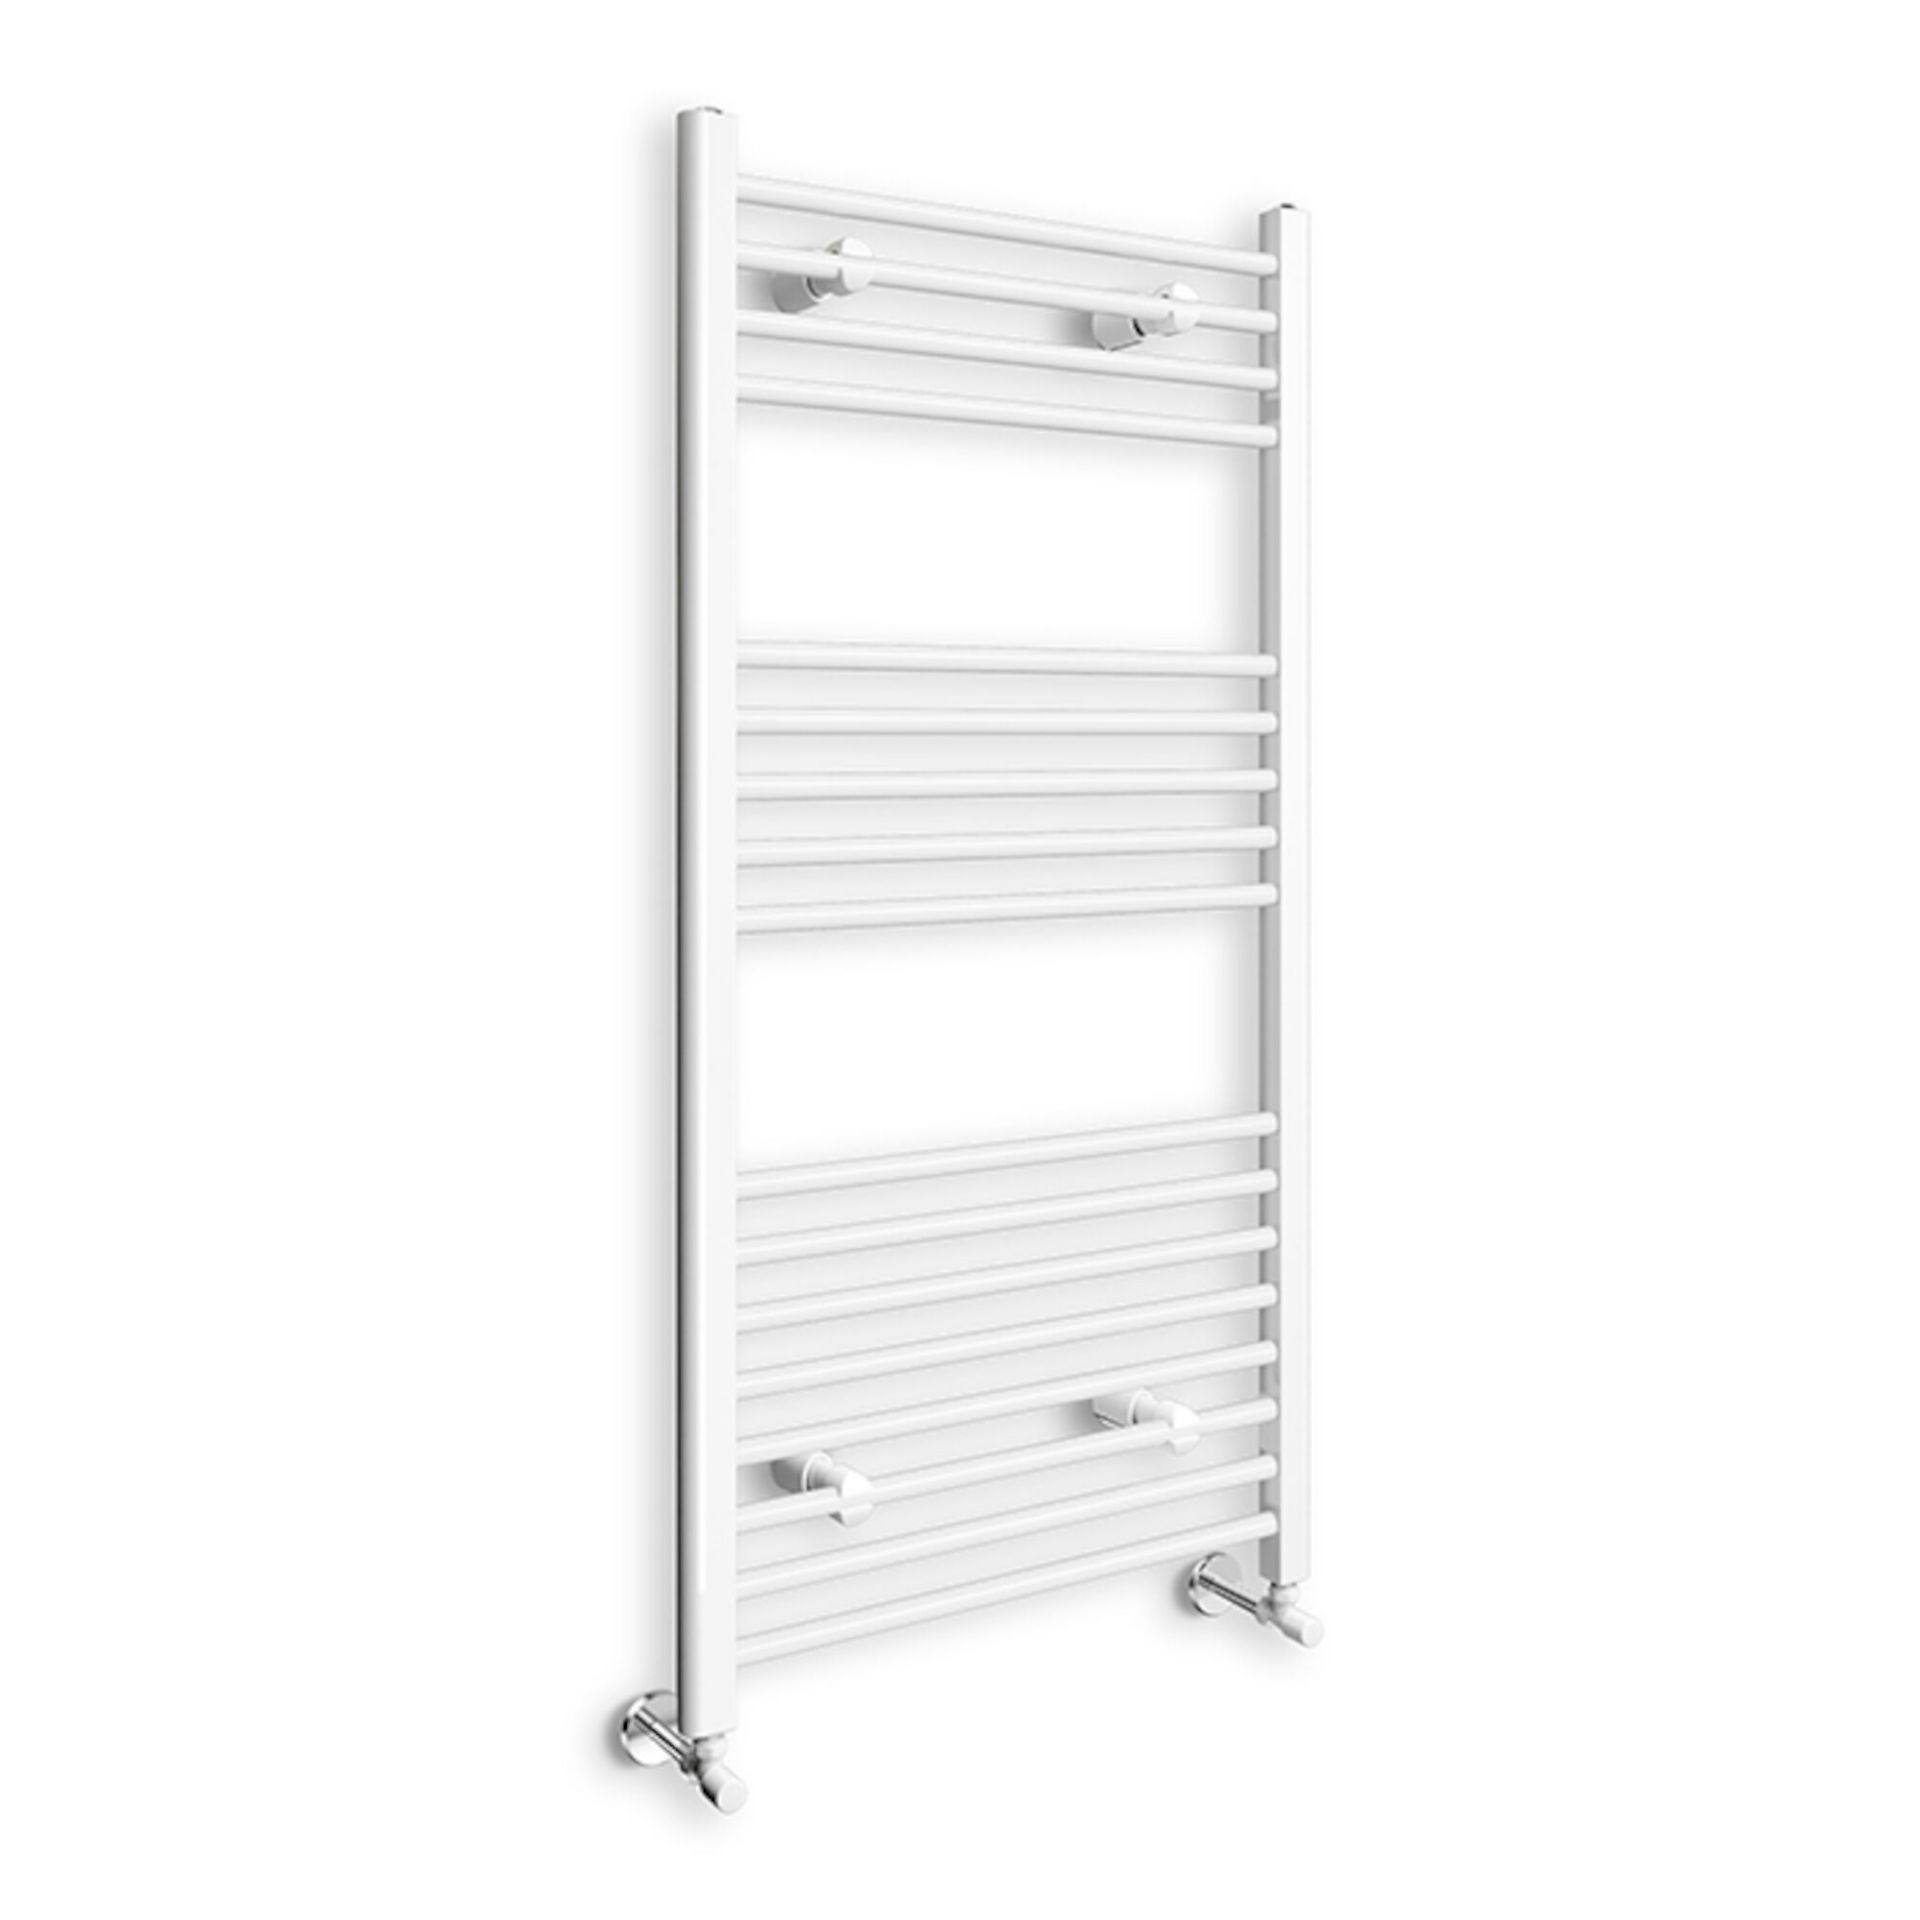 (YC43) 1200x600mm White Heated Towel Radiator. Made from low carbon steel Finished with a high